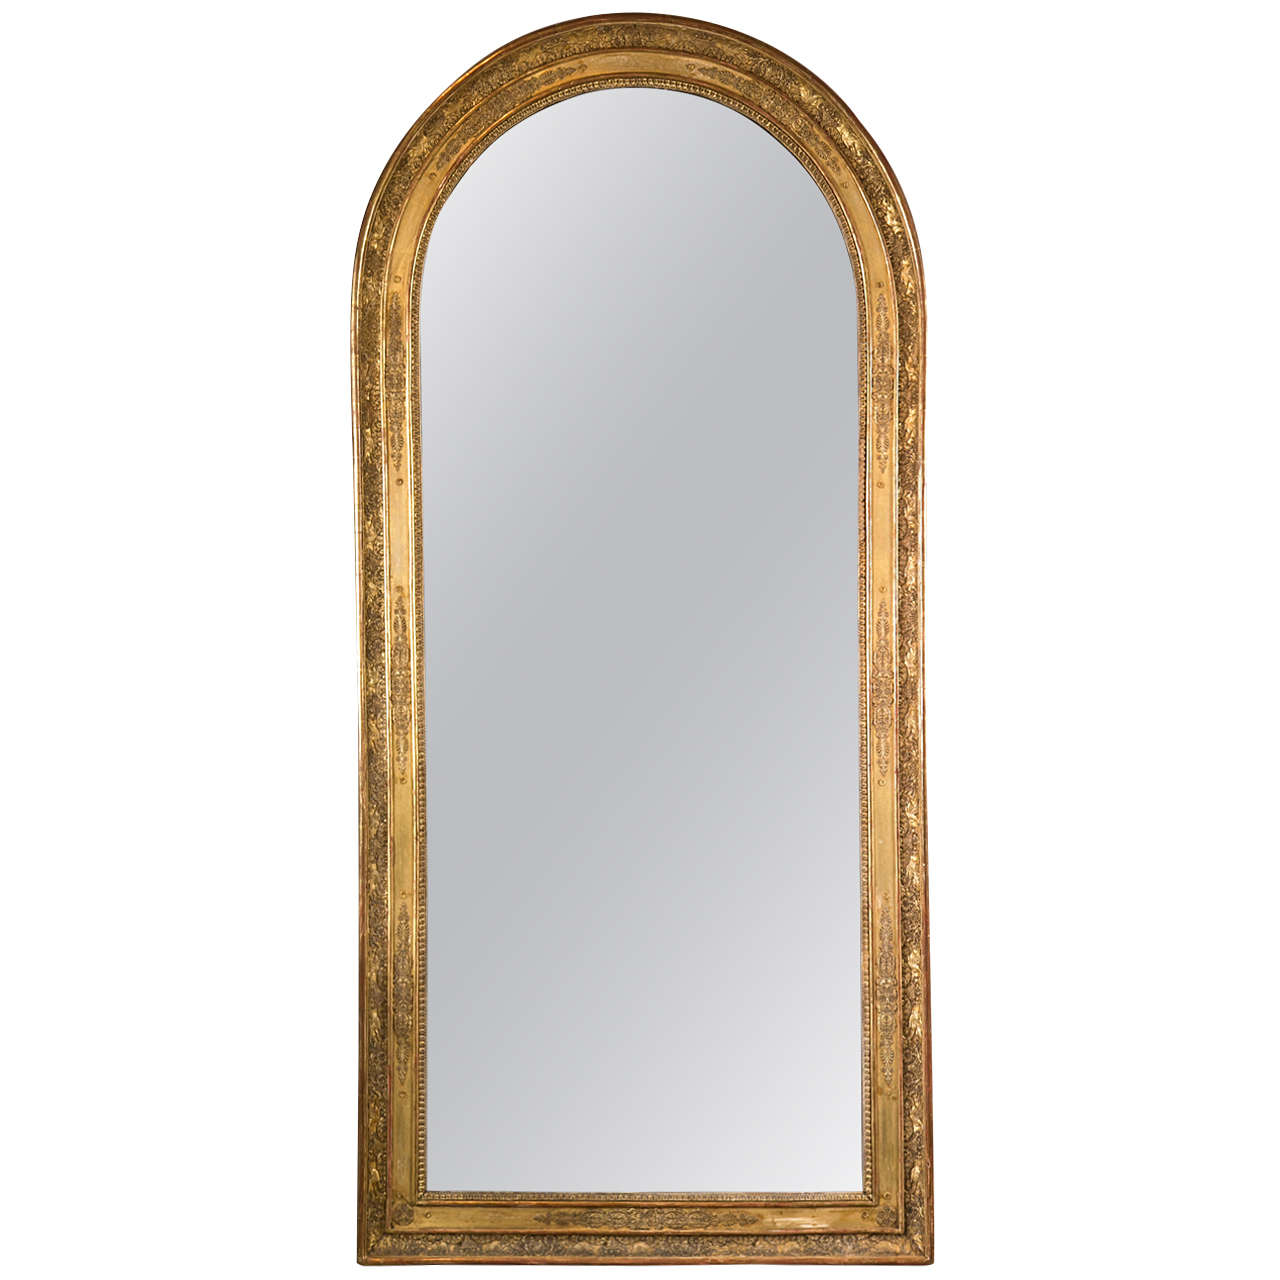 French Empire Giltwood Mirror, Large Scale